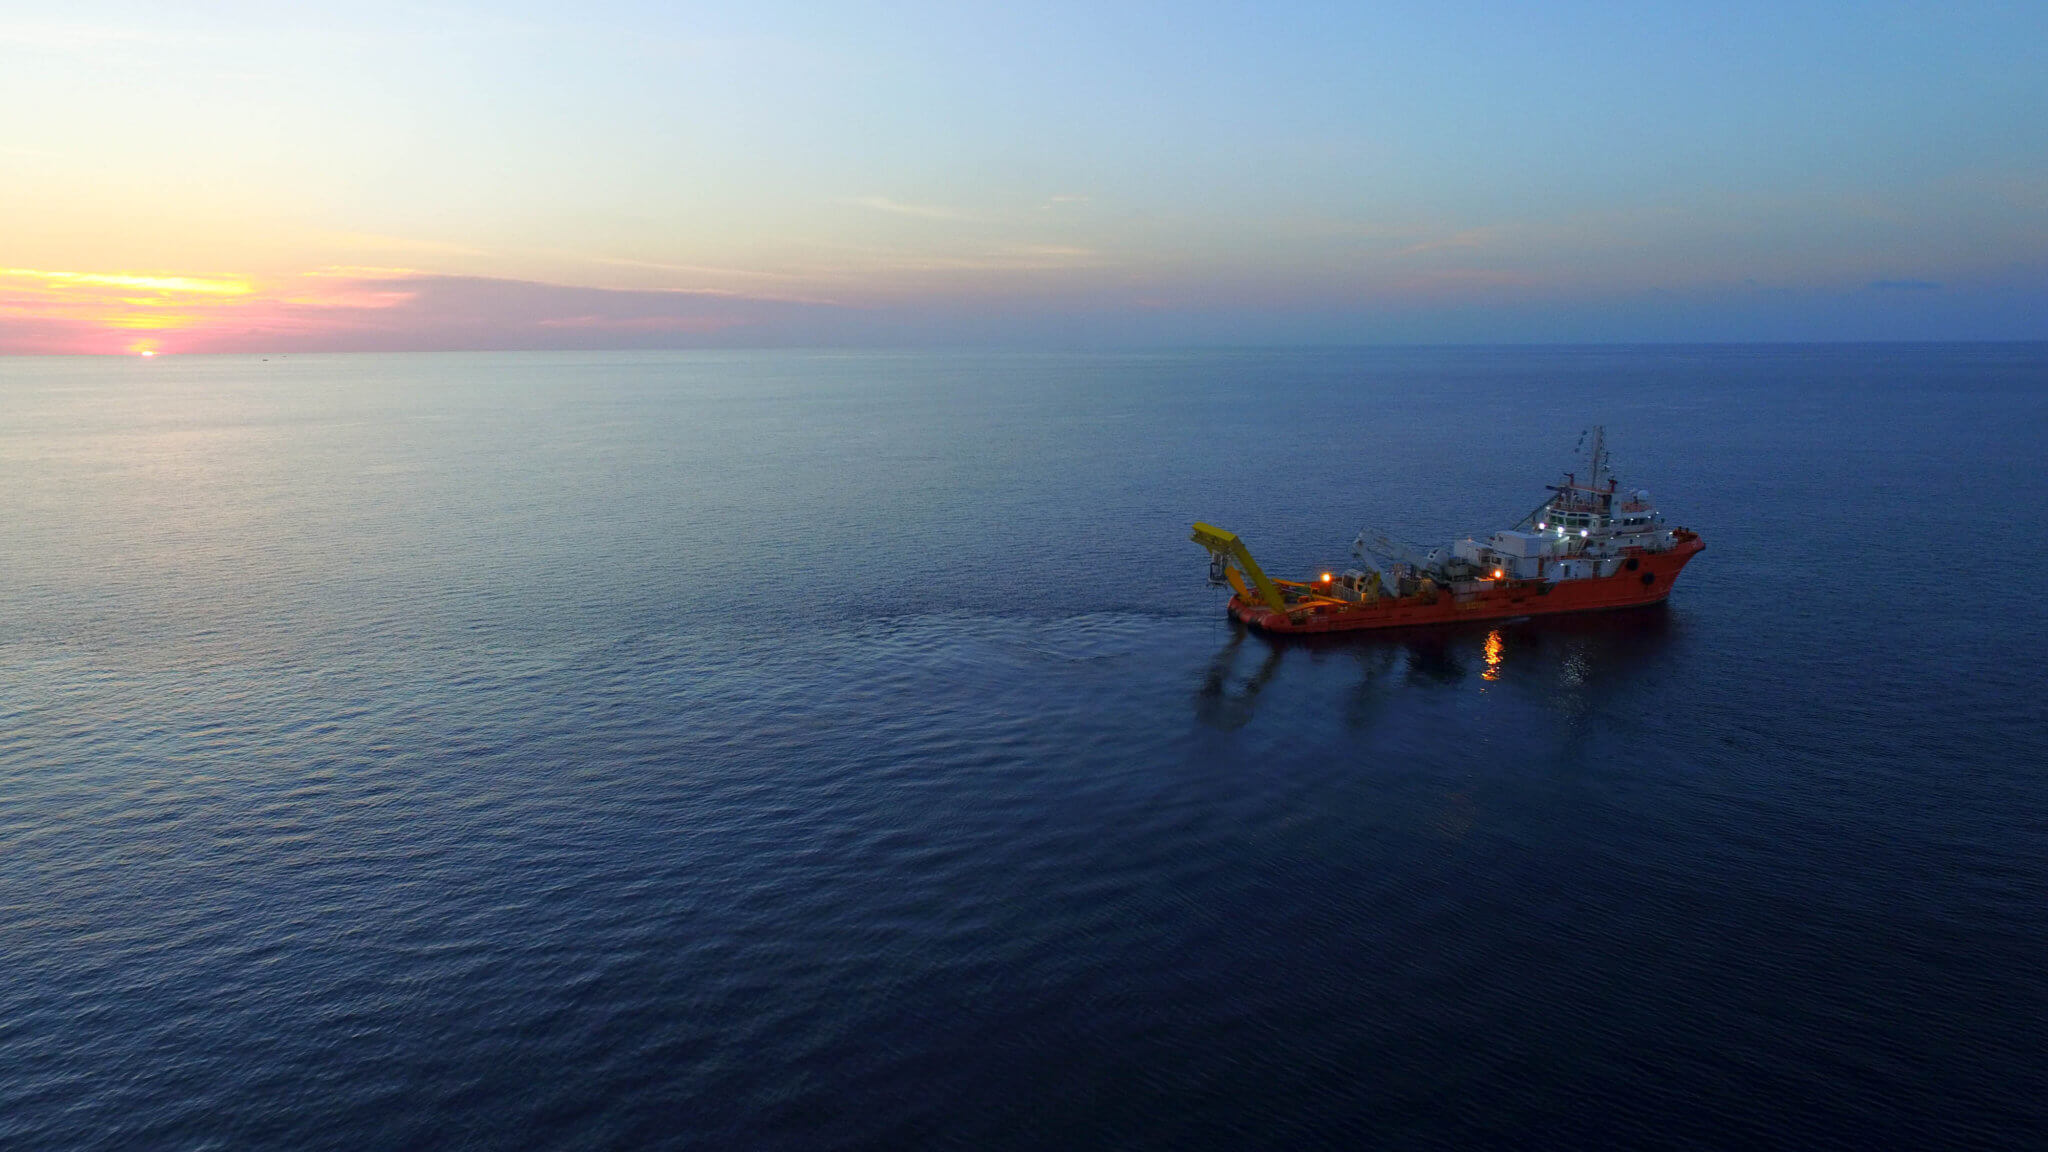 A ship on the ocean at sunrise, laying or inspecting submarine power cables for offshore wind turbines.